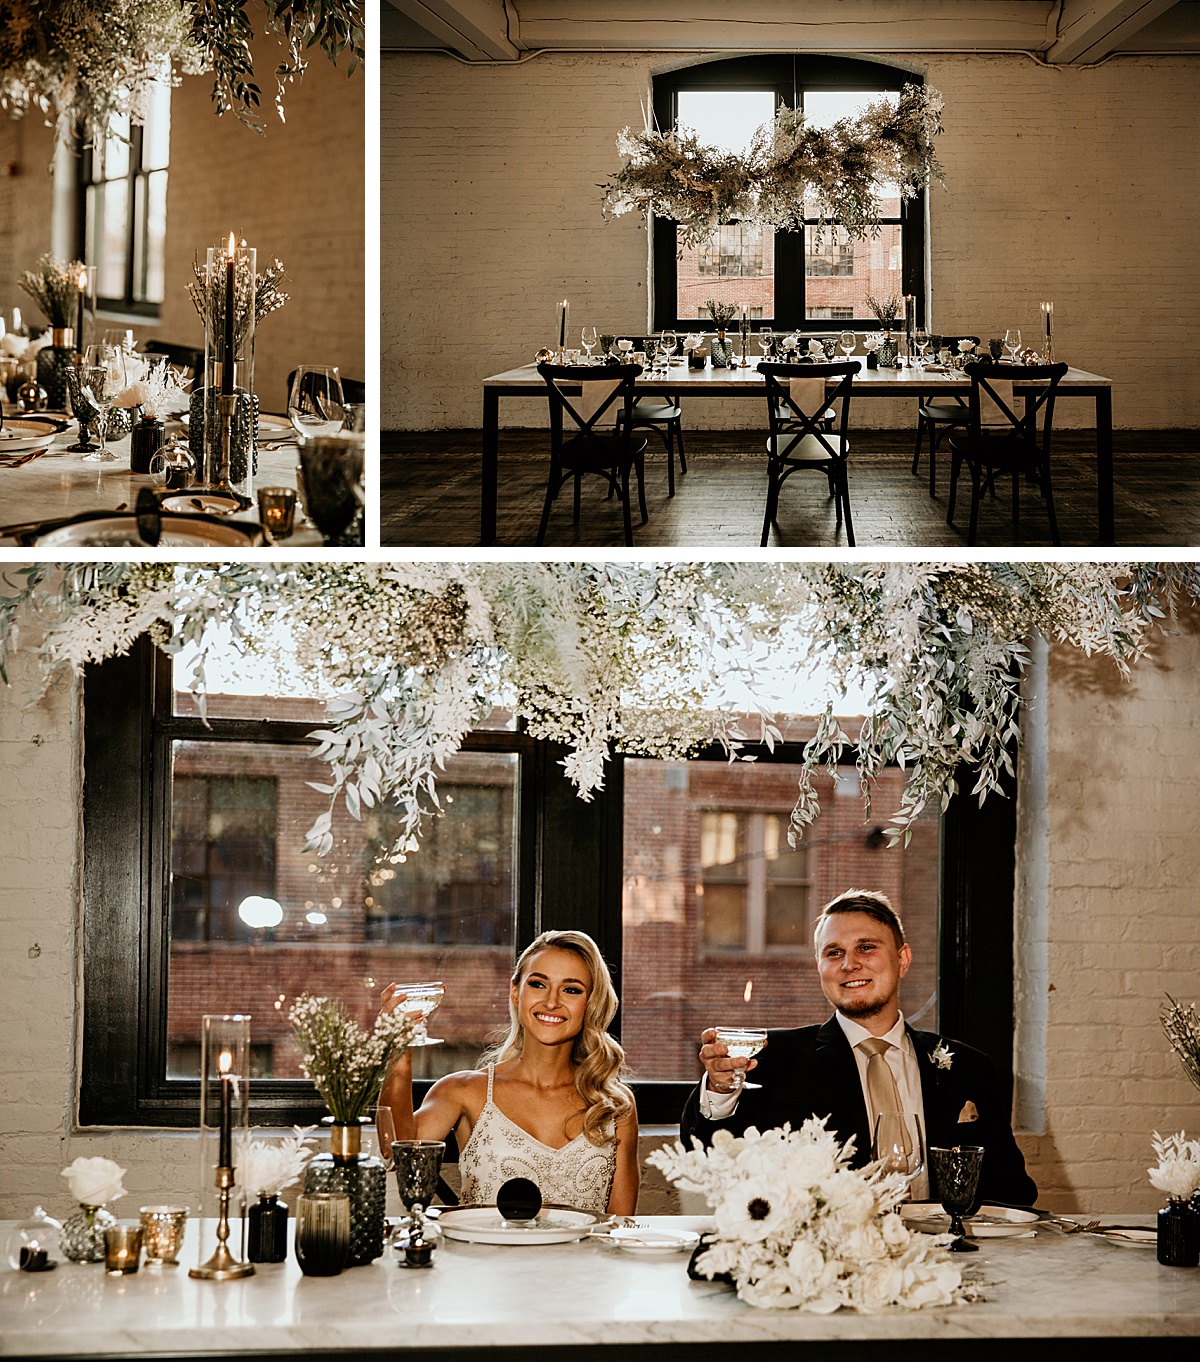 3 photos of a wedding guest table set up with a hanging centerpiece and the newlyweds holding up their cups for a toast